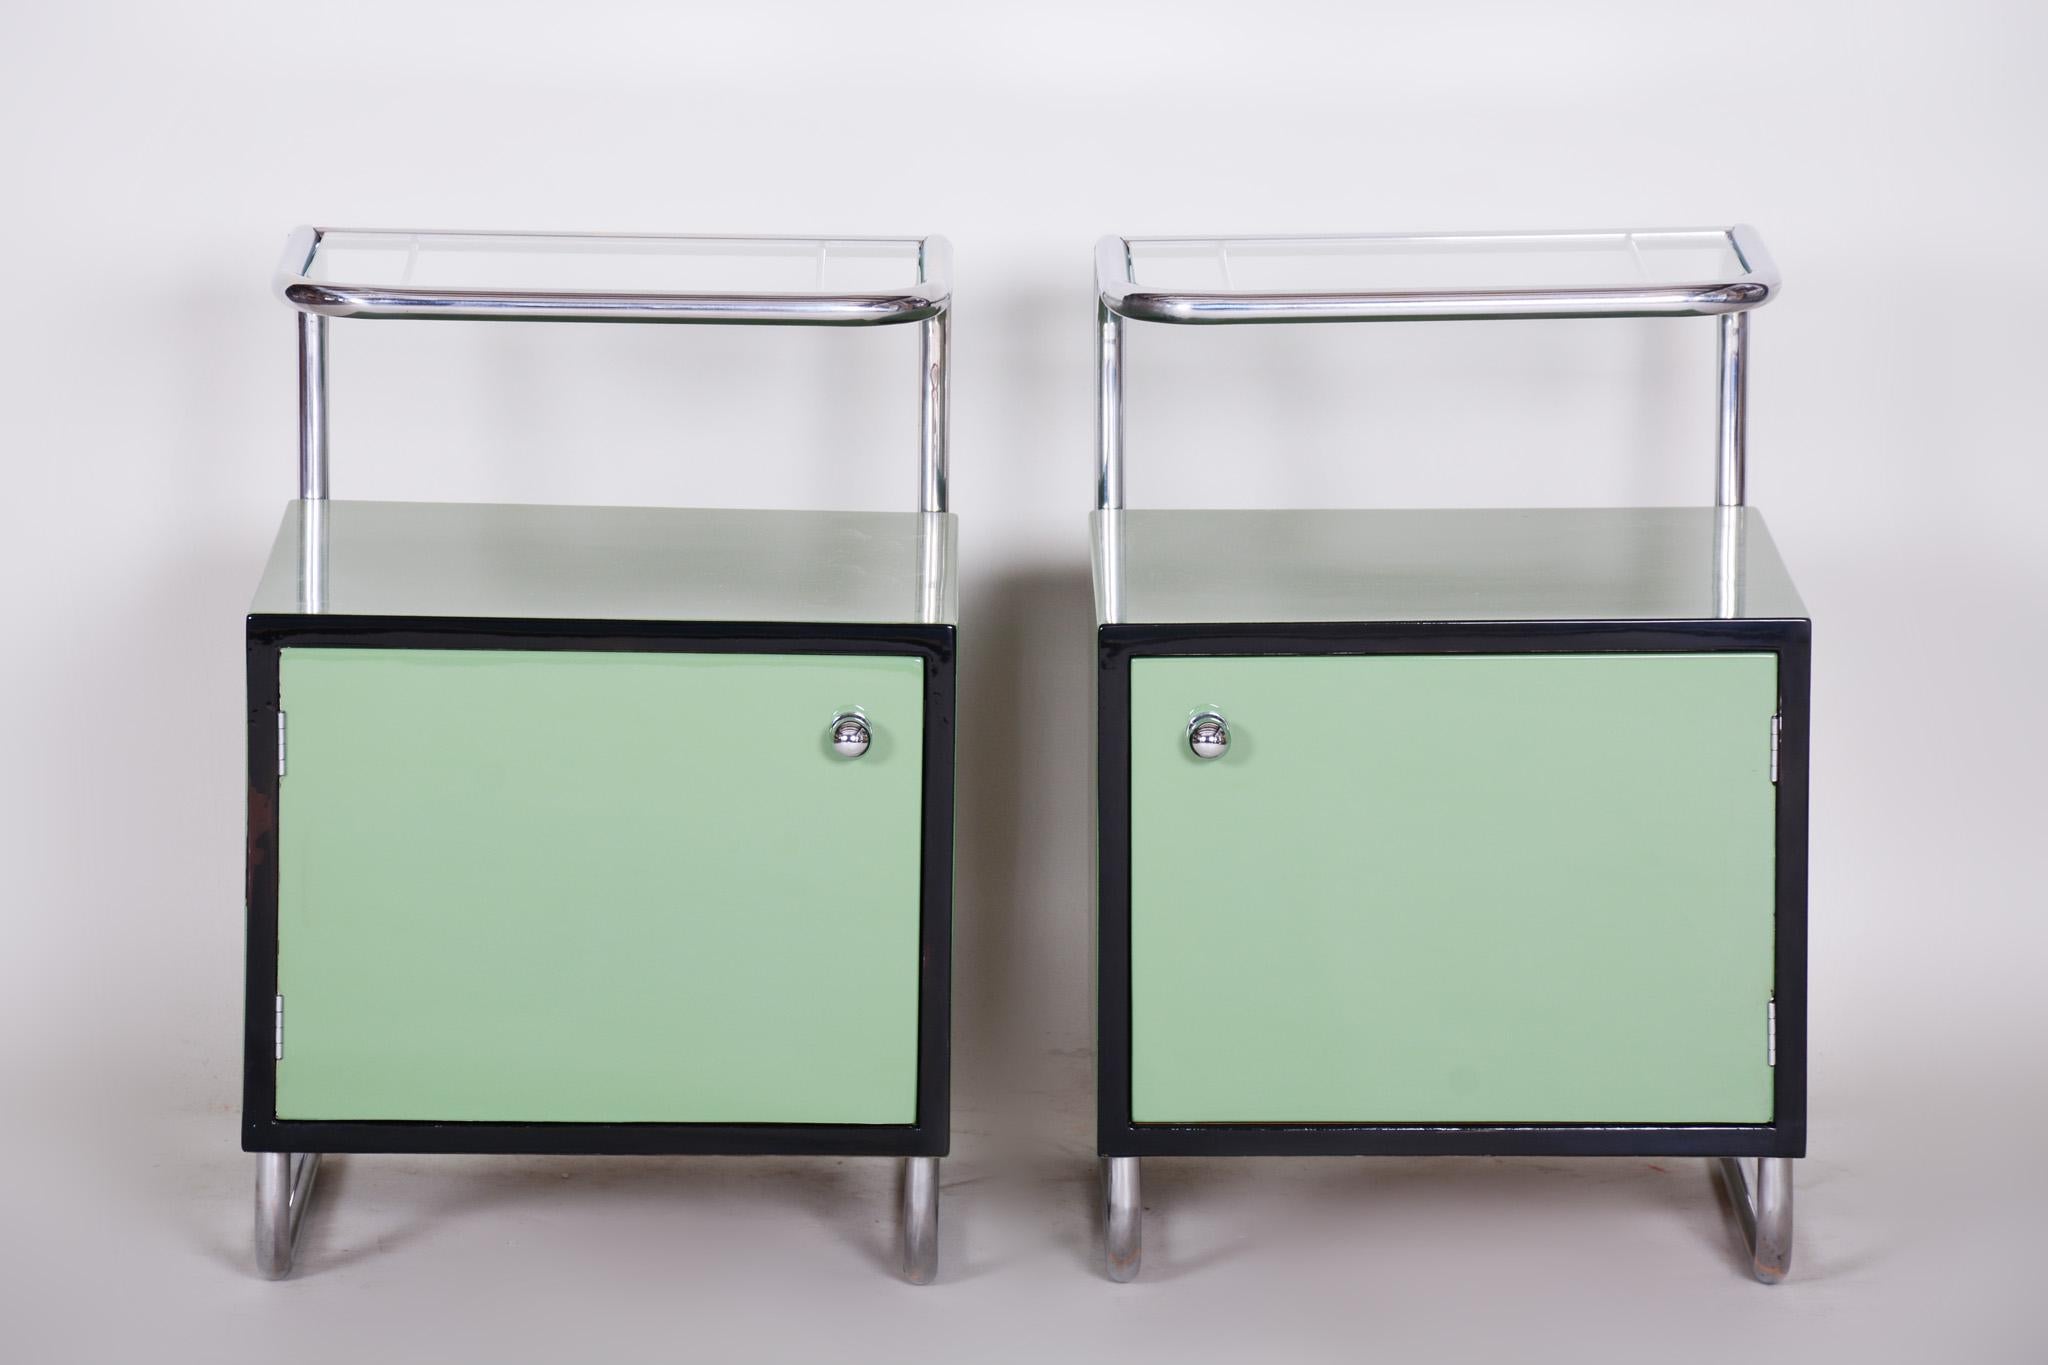 This original Bauhaus bed-side tables manufactured by Vichr and spol is a perfect representation of the simplistic elegance of the Bauhaus era.

This perfect example of Czech Bauhaus style which hails from a weighty midcentury conglomerate of